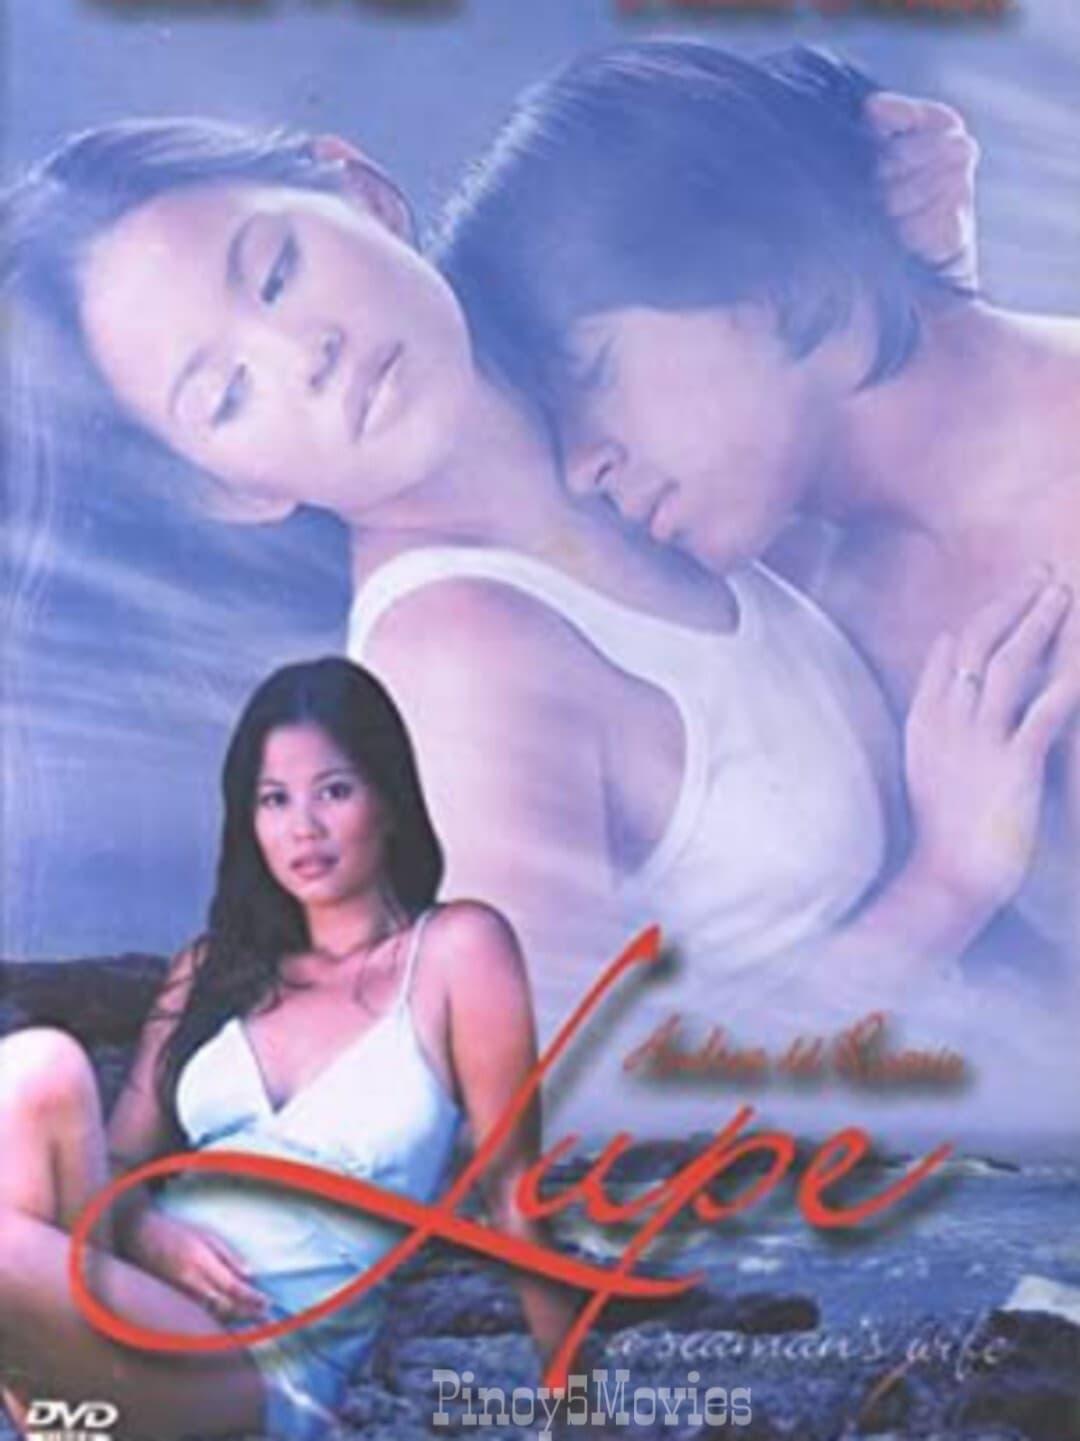 Lupe: A Seaman's Wife poster